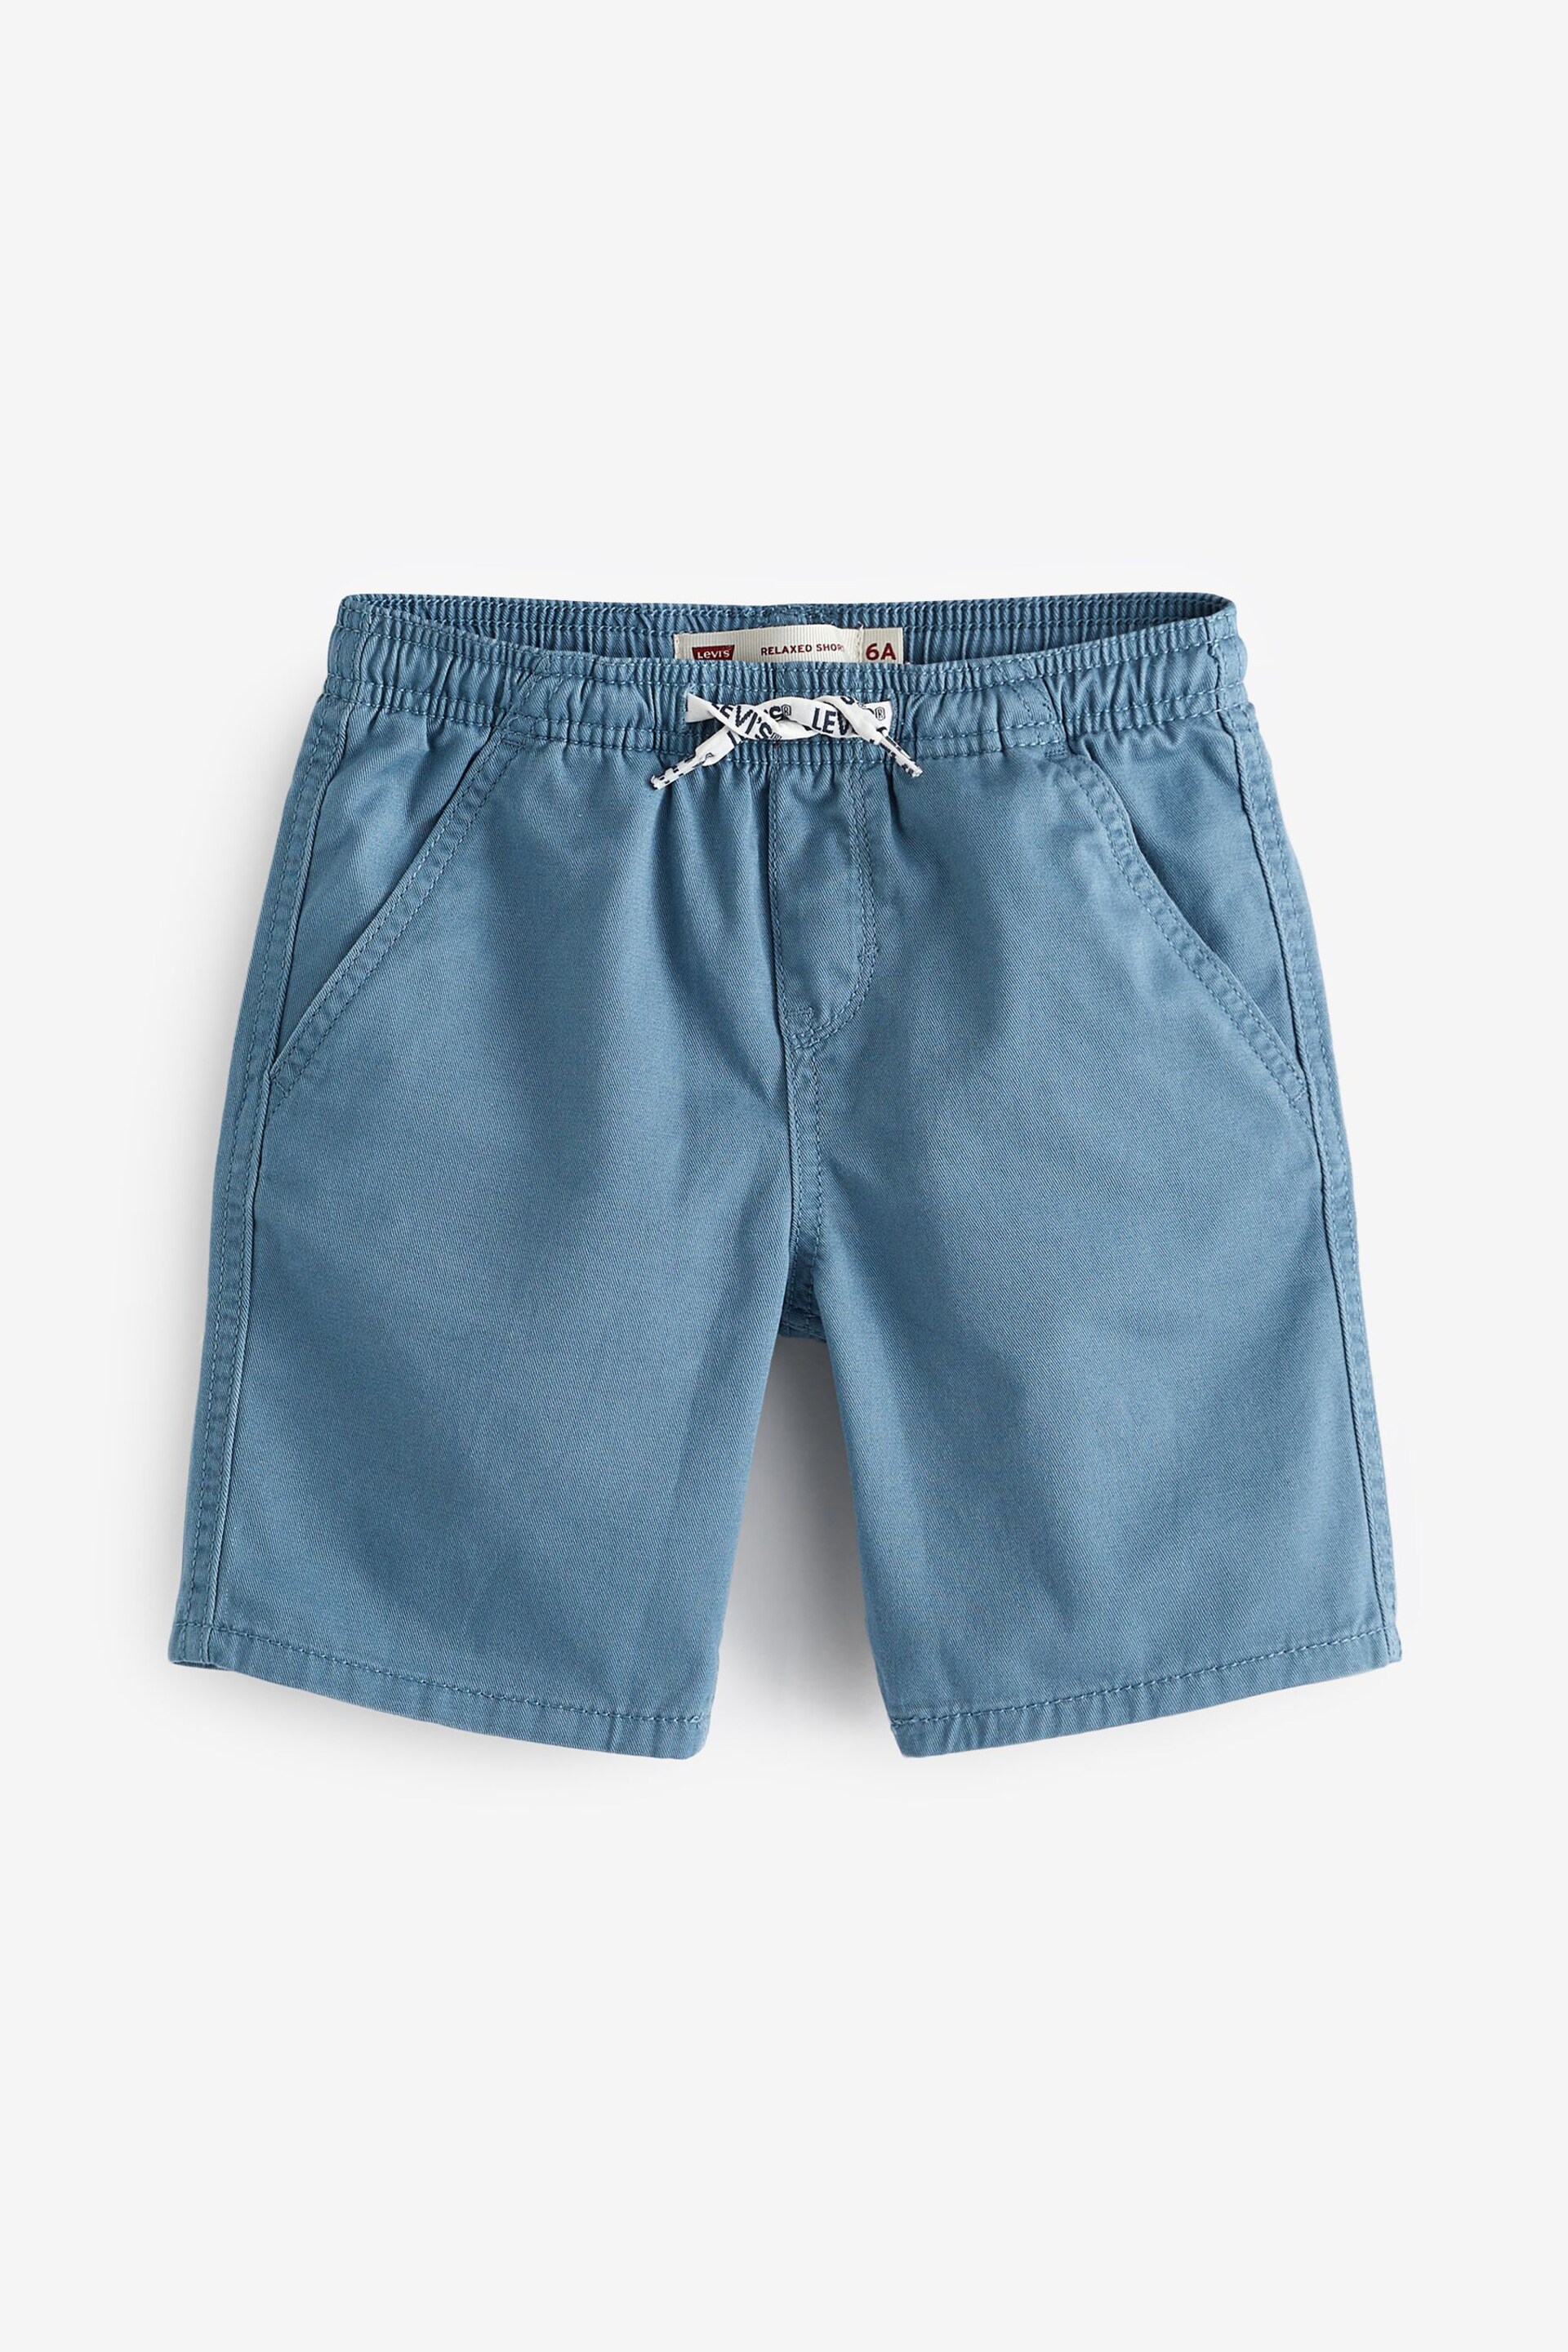 Levi's® Blue Pull-On Woven Shorts - Image 1 of 4